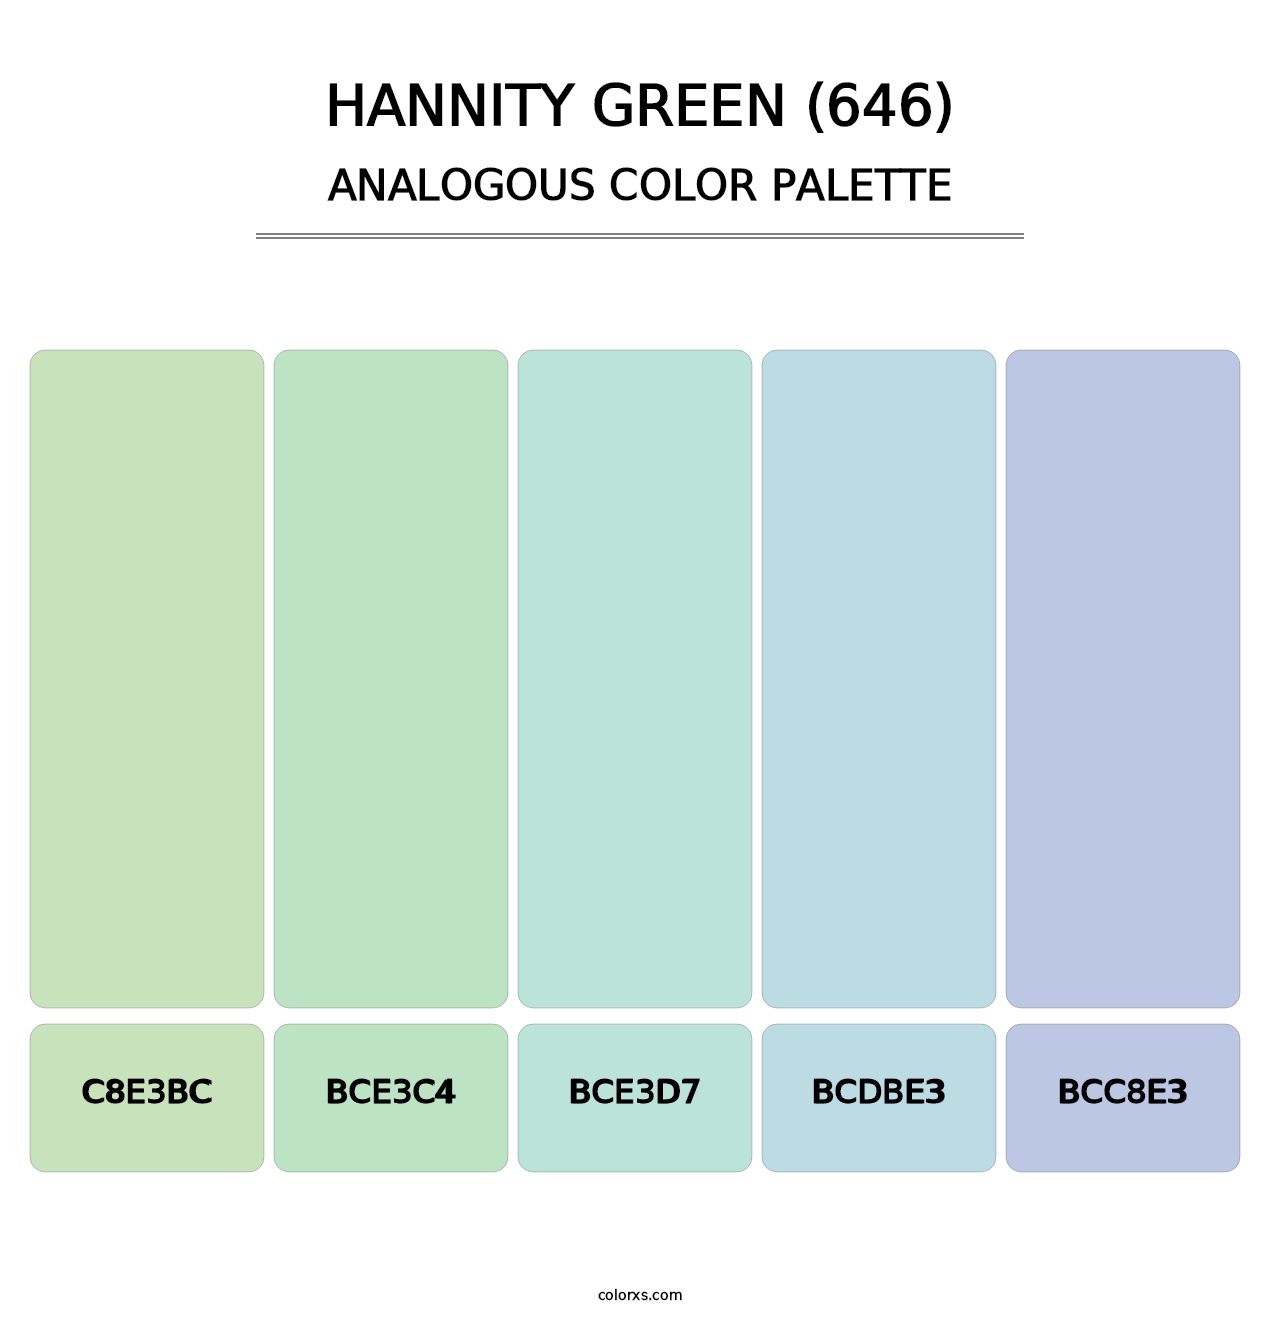 Hannity Green (646) - Analogous Color Palette